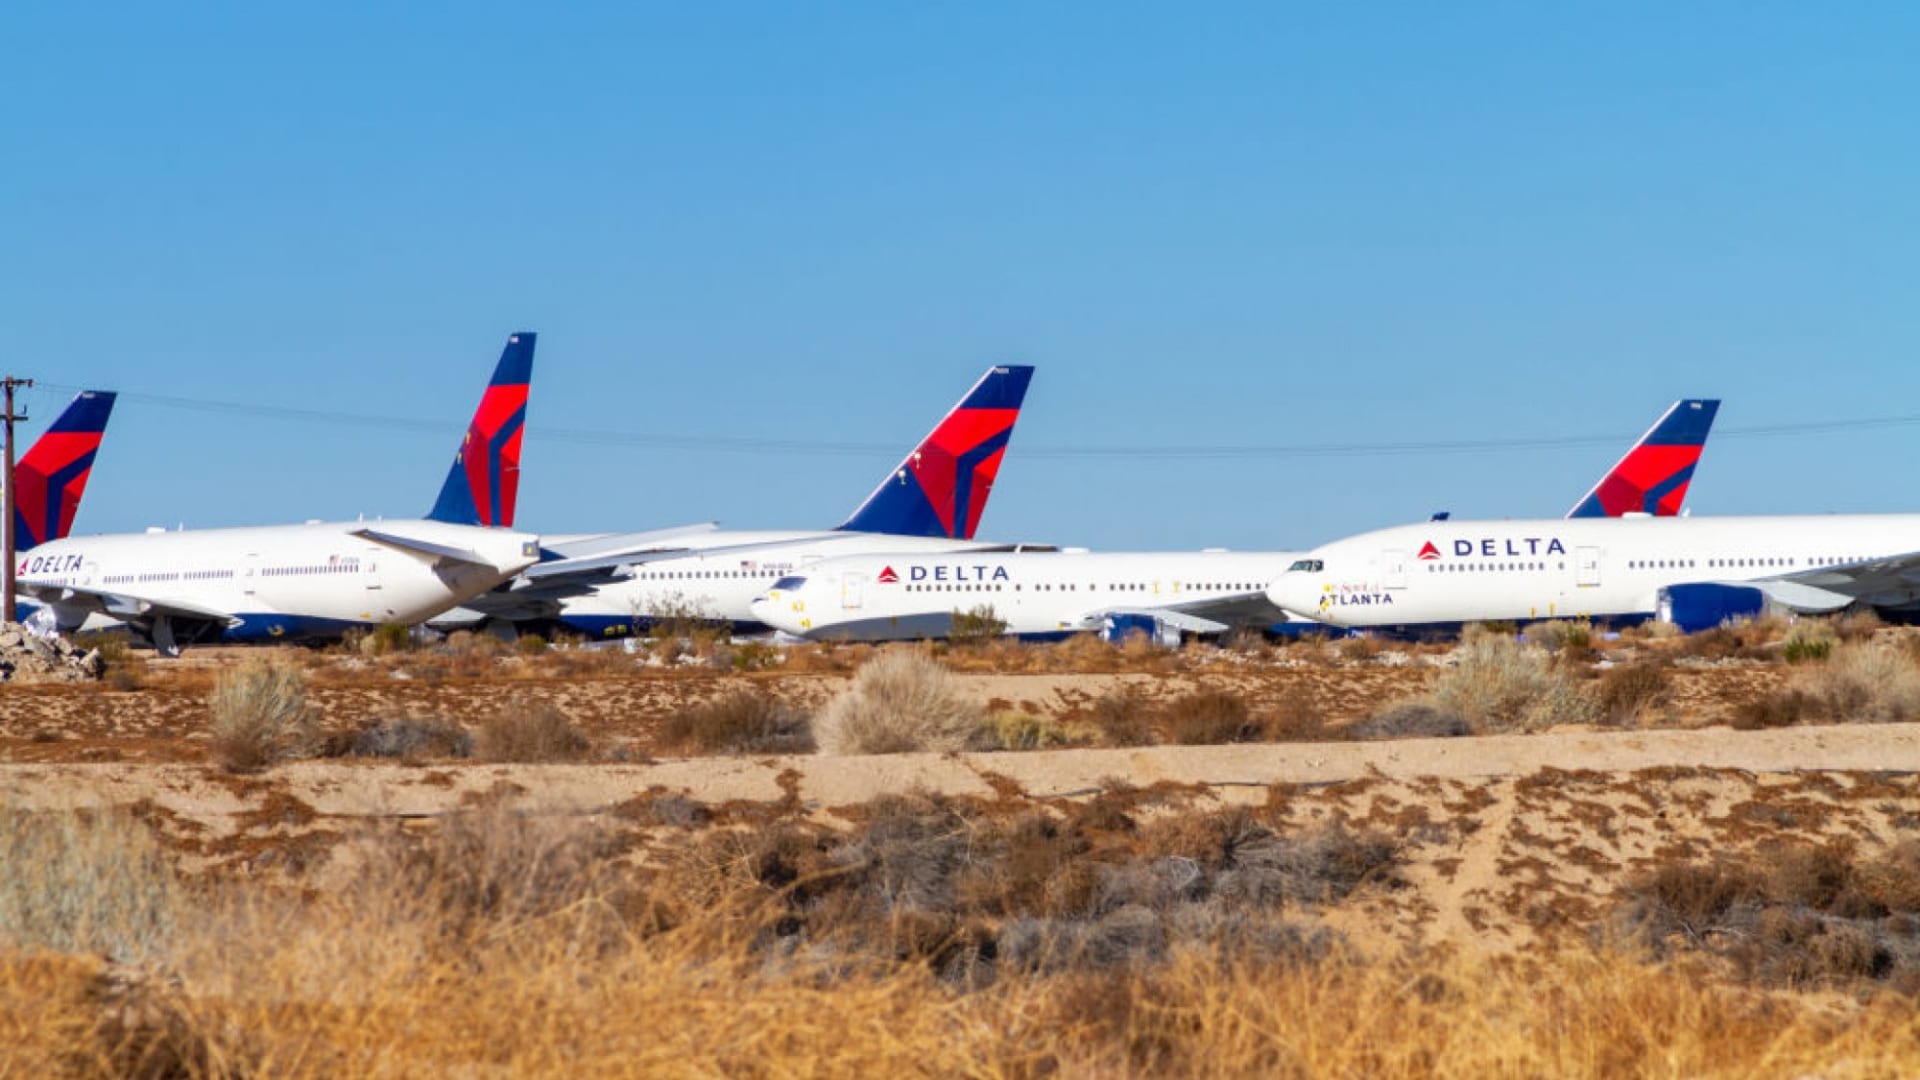 Delta Offered Customers a Chance to Buy a Gift Card Made From an Old DC-9 Aircraft. It Sold Out in Minutes